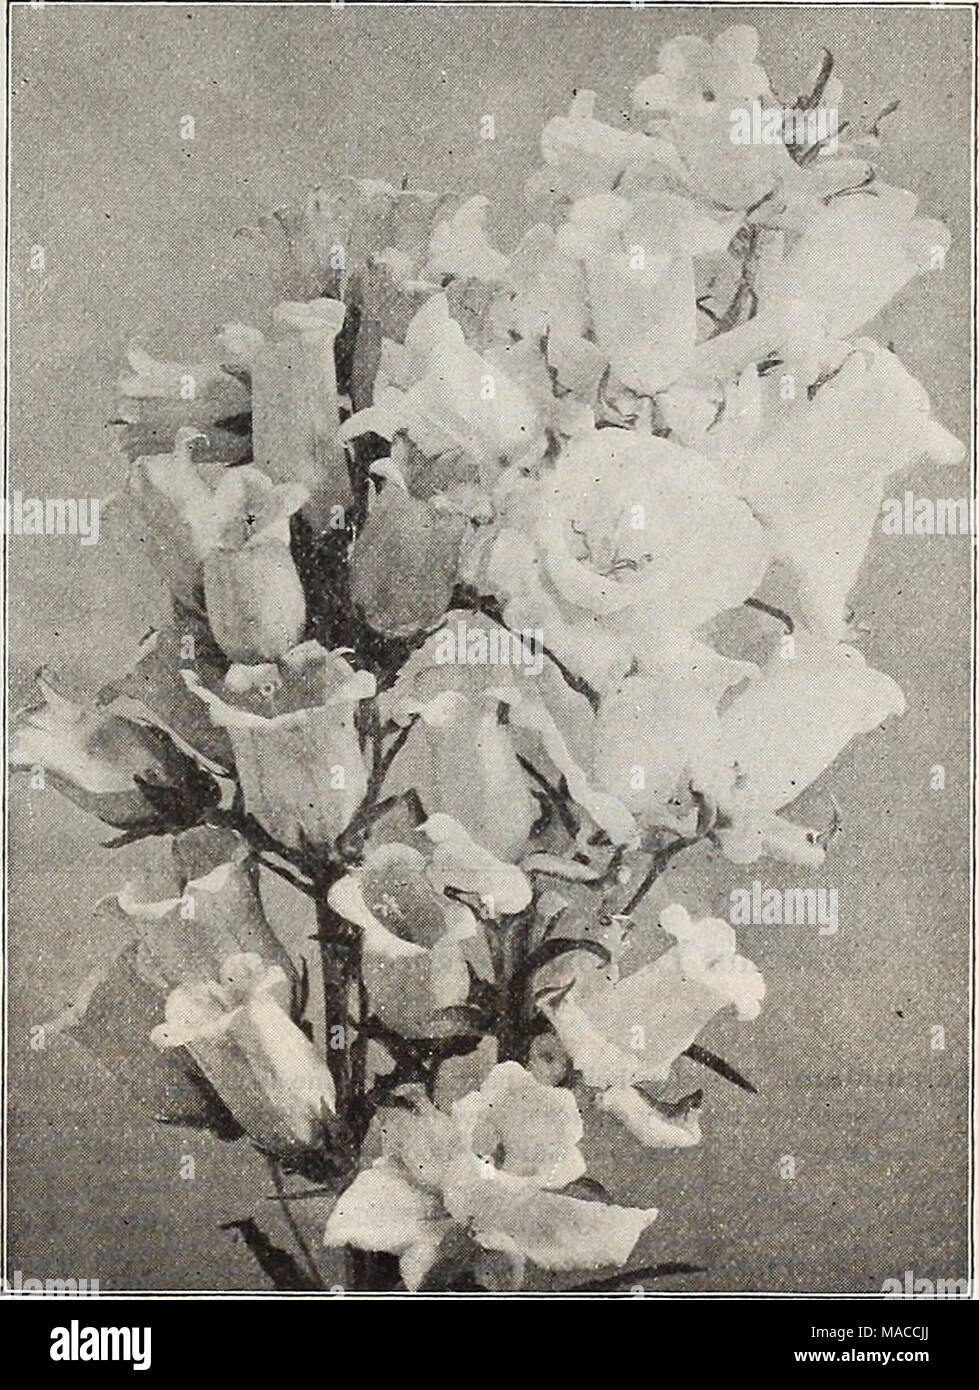 . Dreer's wholesale price list : bulbs for florists plants for florists flower seeds for florists vegetable and grass seeds, fertilizers, insecticides tools, sundries, etc . COREOPSIS LANCEOLATA GRANDIFLORA CAMPANULA MEDIUM (Canterbury Bells) Tr. pkt. Auricula, Choicest mixed. (Primula) 30 Bocconia Cordata. (Plume Poppy) 10 Boltonia Asteroides. White 25 &quot; Latisquama. Pink 25 Callirhoe Involucrata . 15 Campanula Carpatica. Blue. 10 Alba. White 10 Latifolla macrantha 15 Media calycanthema. Blue (Cup and Saucer, Canterbury Bells) 25 &quot; &quot; Rose 25 &quot; &quot; Striped 25 White 25 &qu Stock Photo